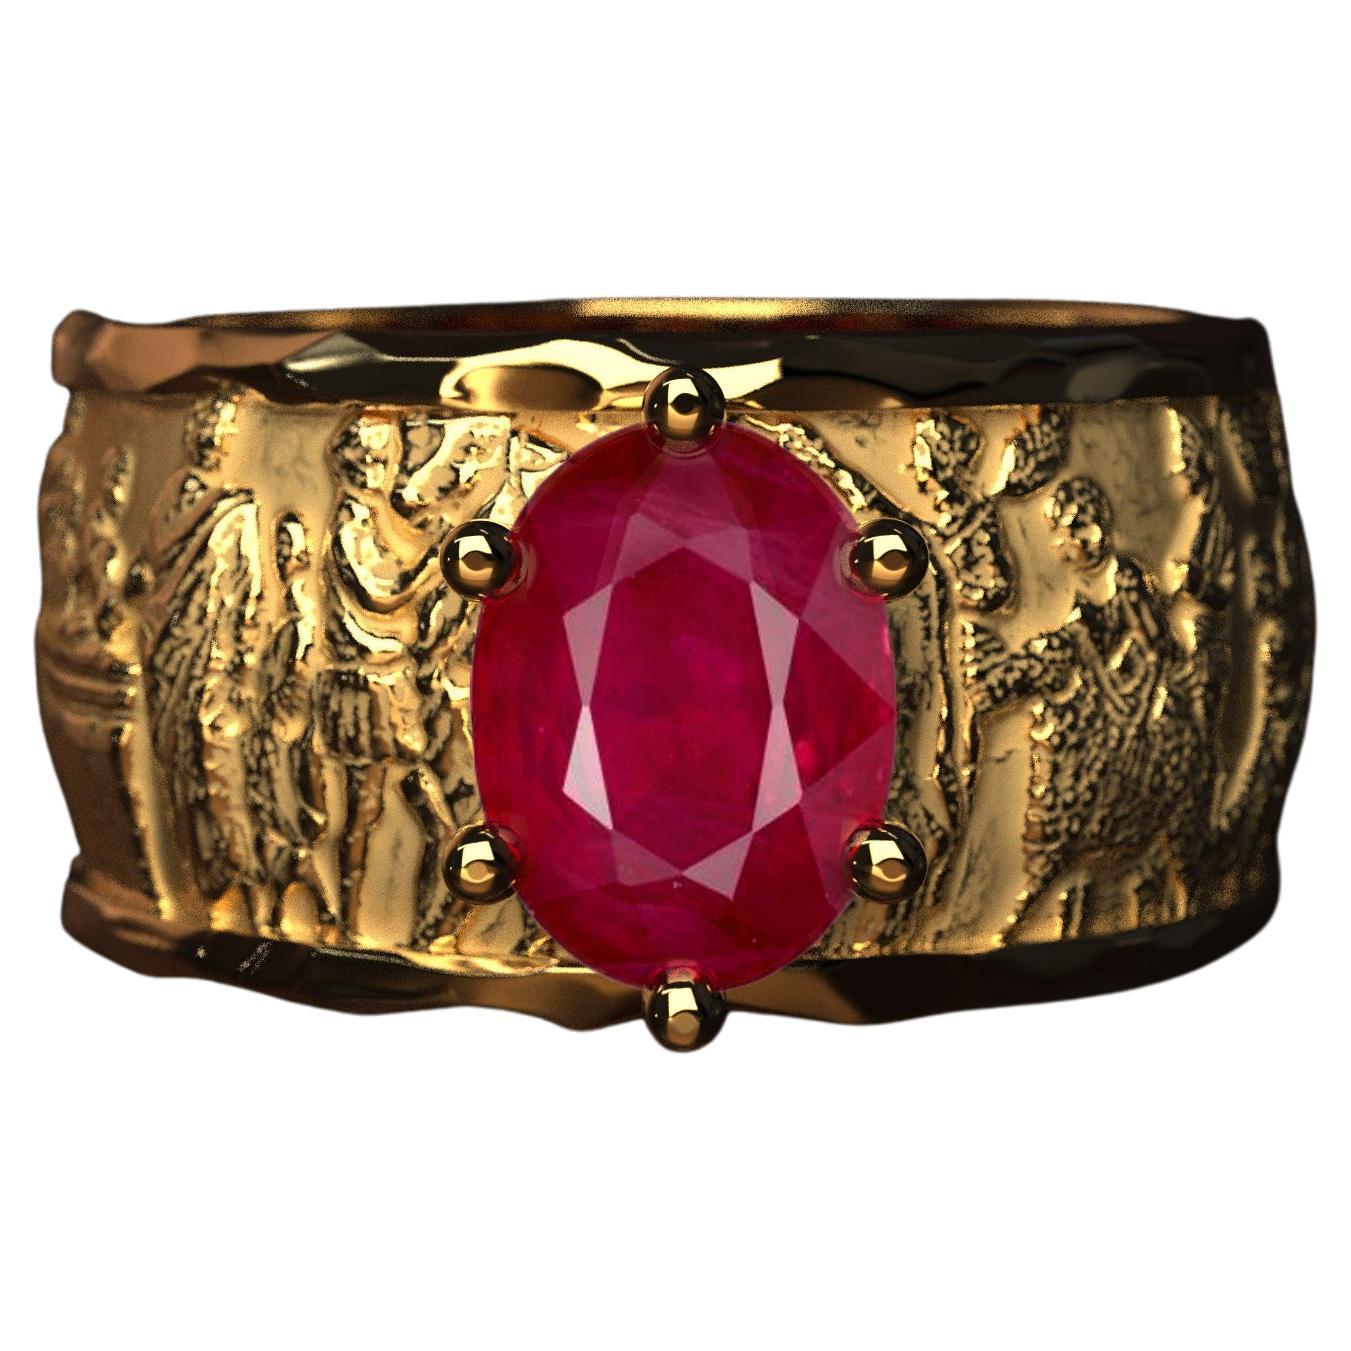 For Sale:  Burma Ruby Ring in 18k Solid Gold, Designed and Crafted in Italy